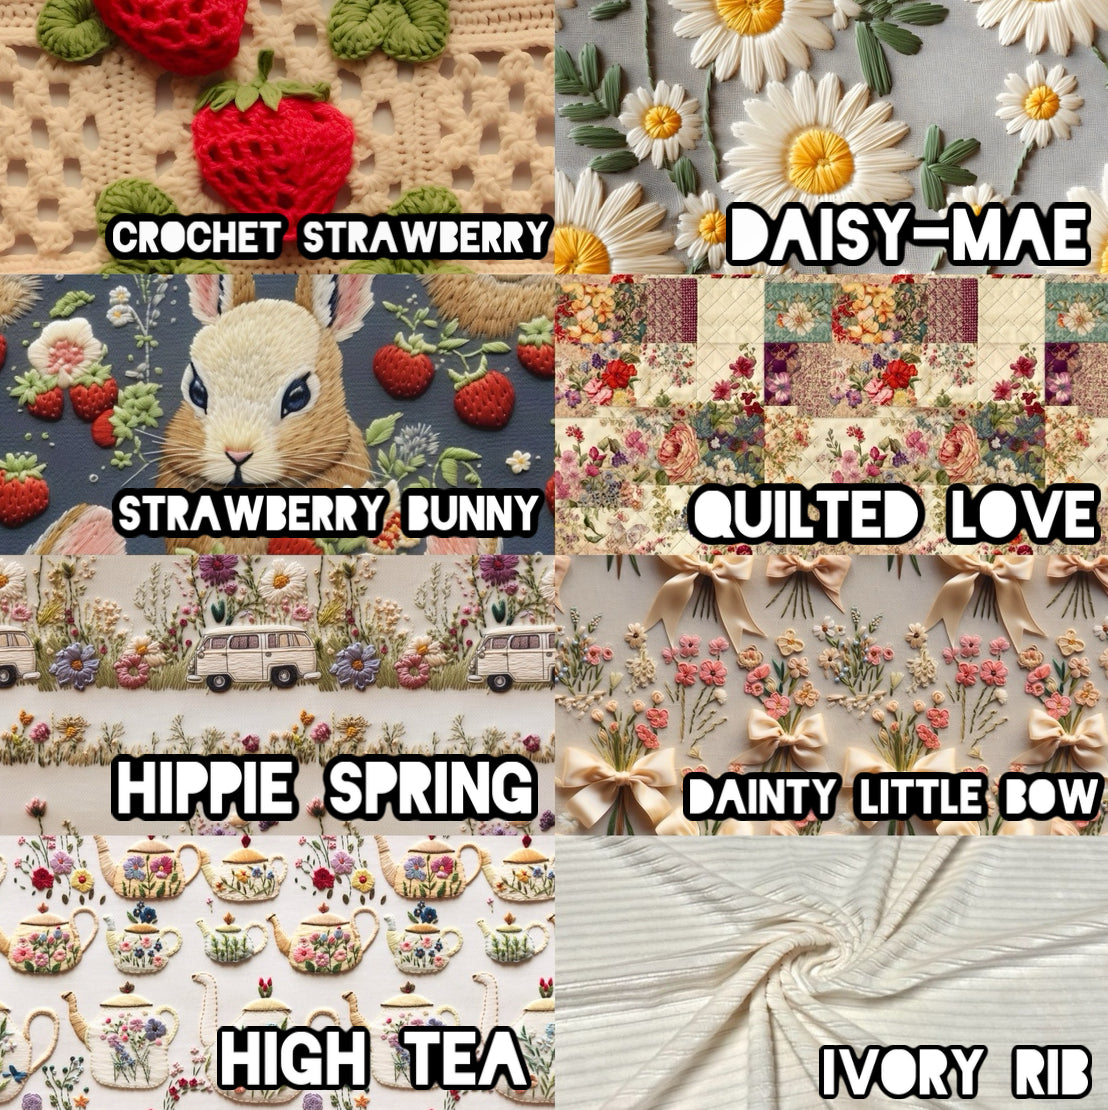 Tea Time + Limited styles accessories +